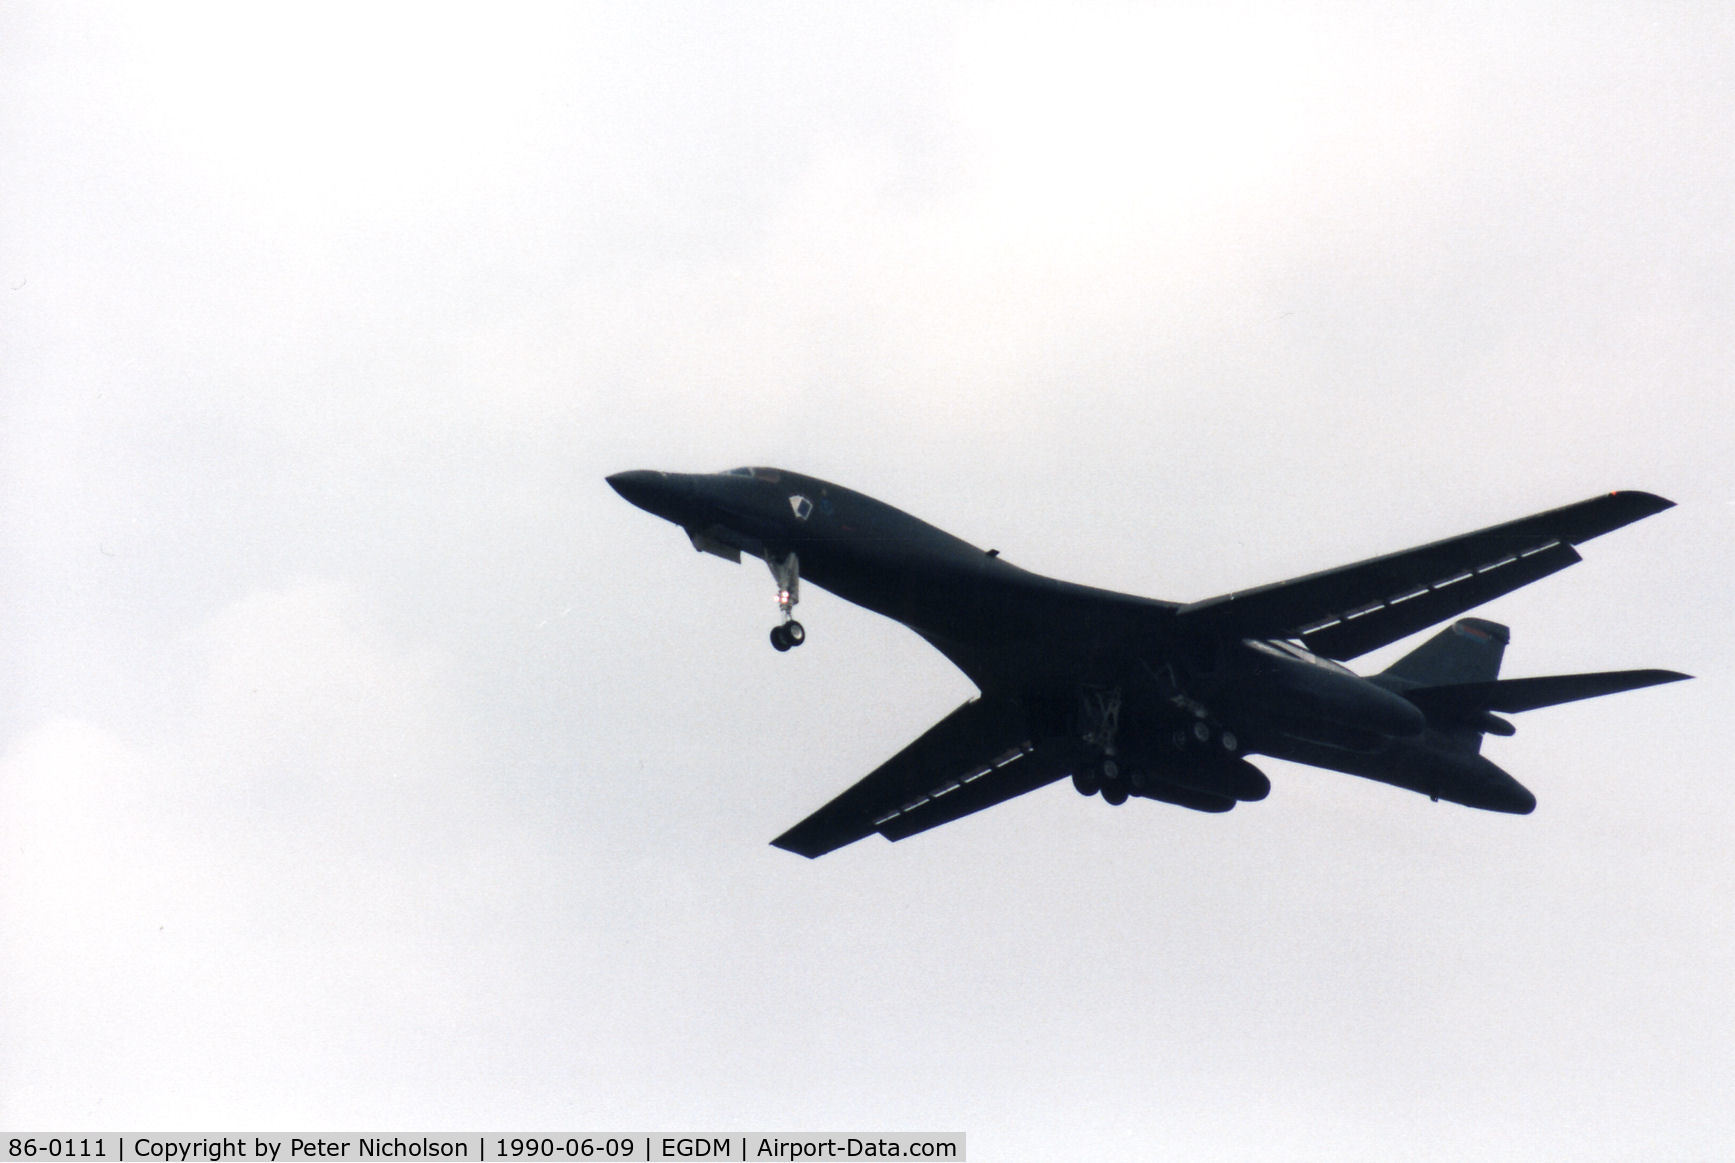 86-0111, 1986 Rockwell B-1B Lancer C/N 71, Ace in the Hole, callsign Norse 41, on a fly-past at the 1990 Boscombe Down Battle of Britain 50th Anniversary Airshow.